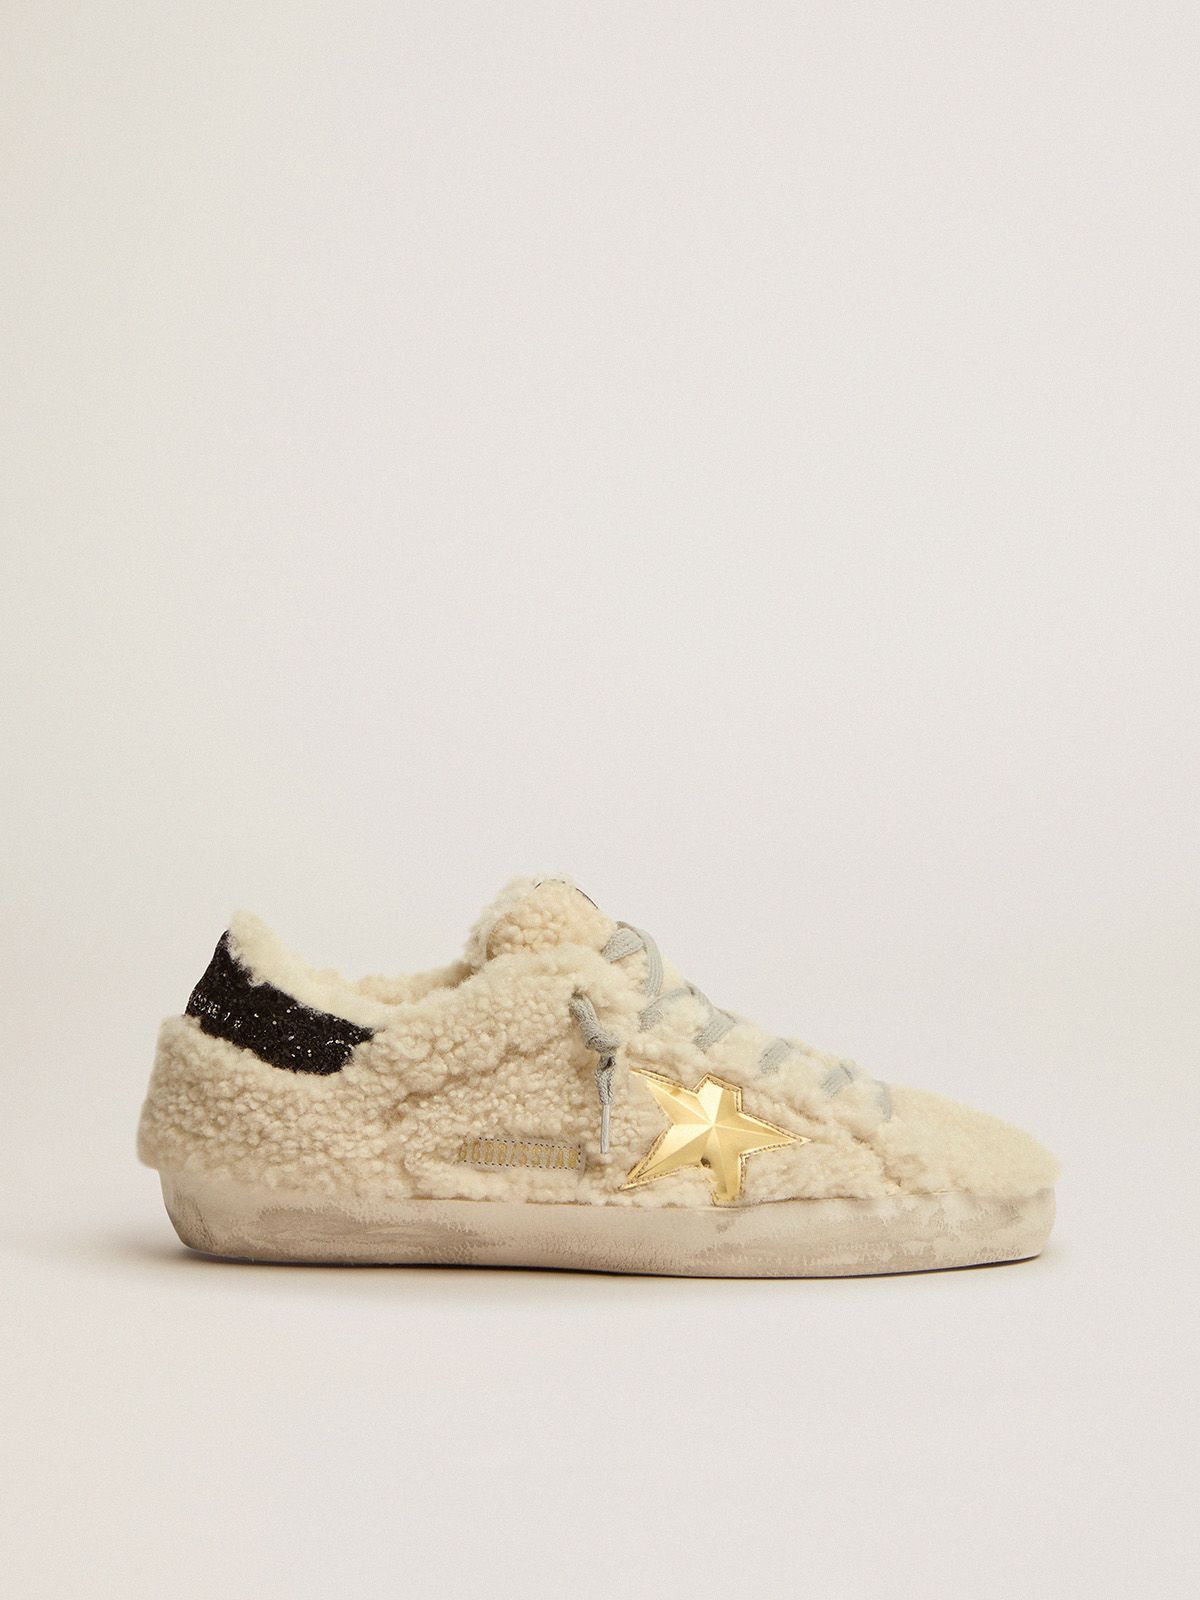 golden goose shearling Super-Star in 3D star gold with sneakers